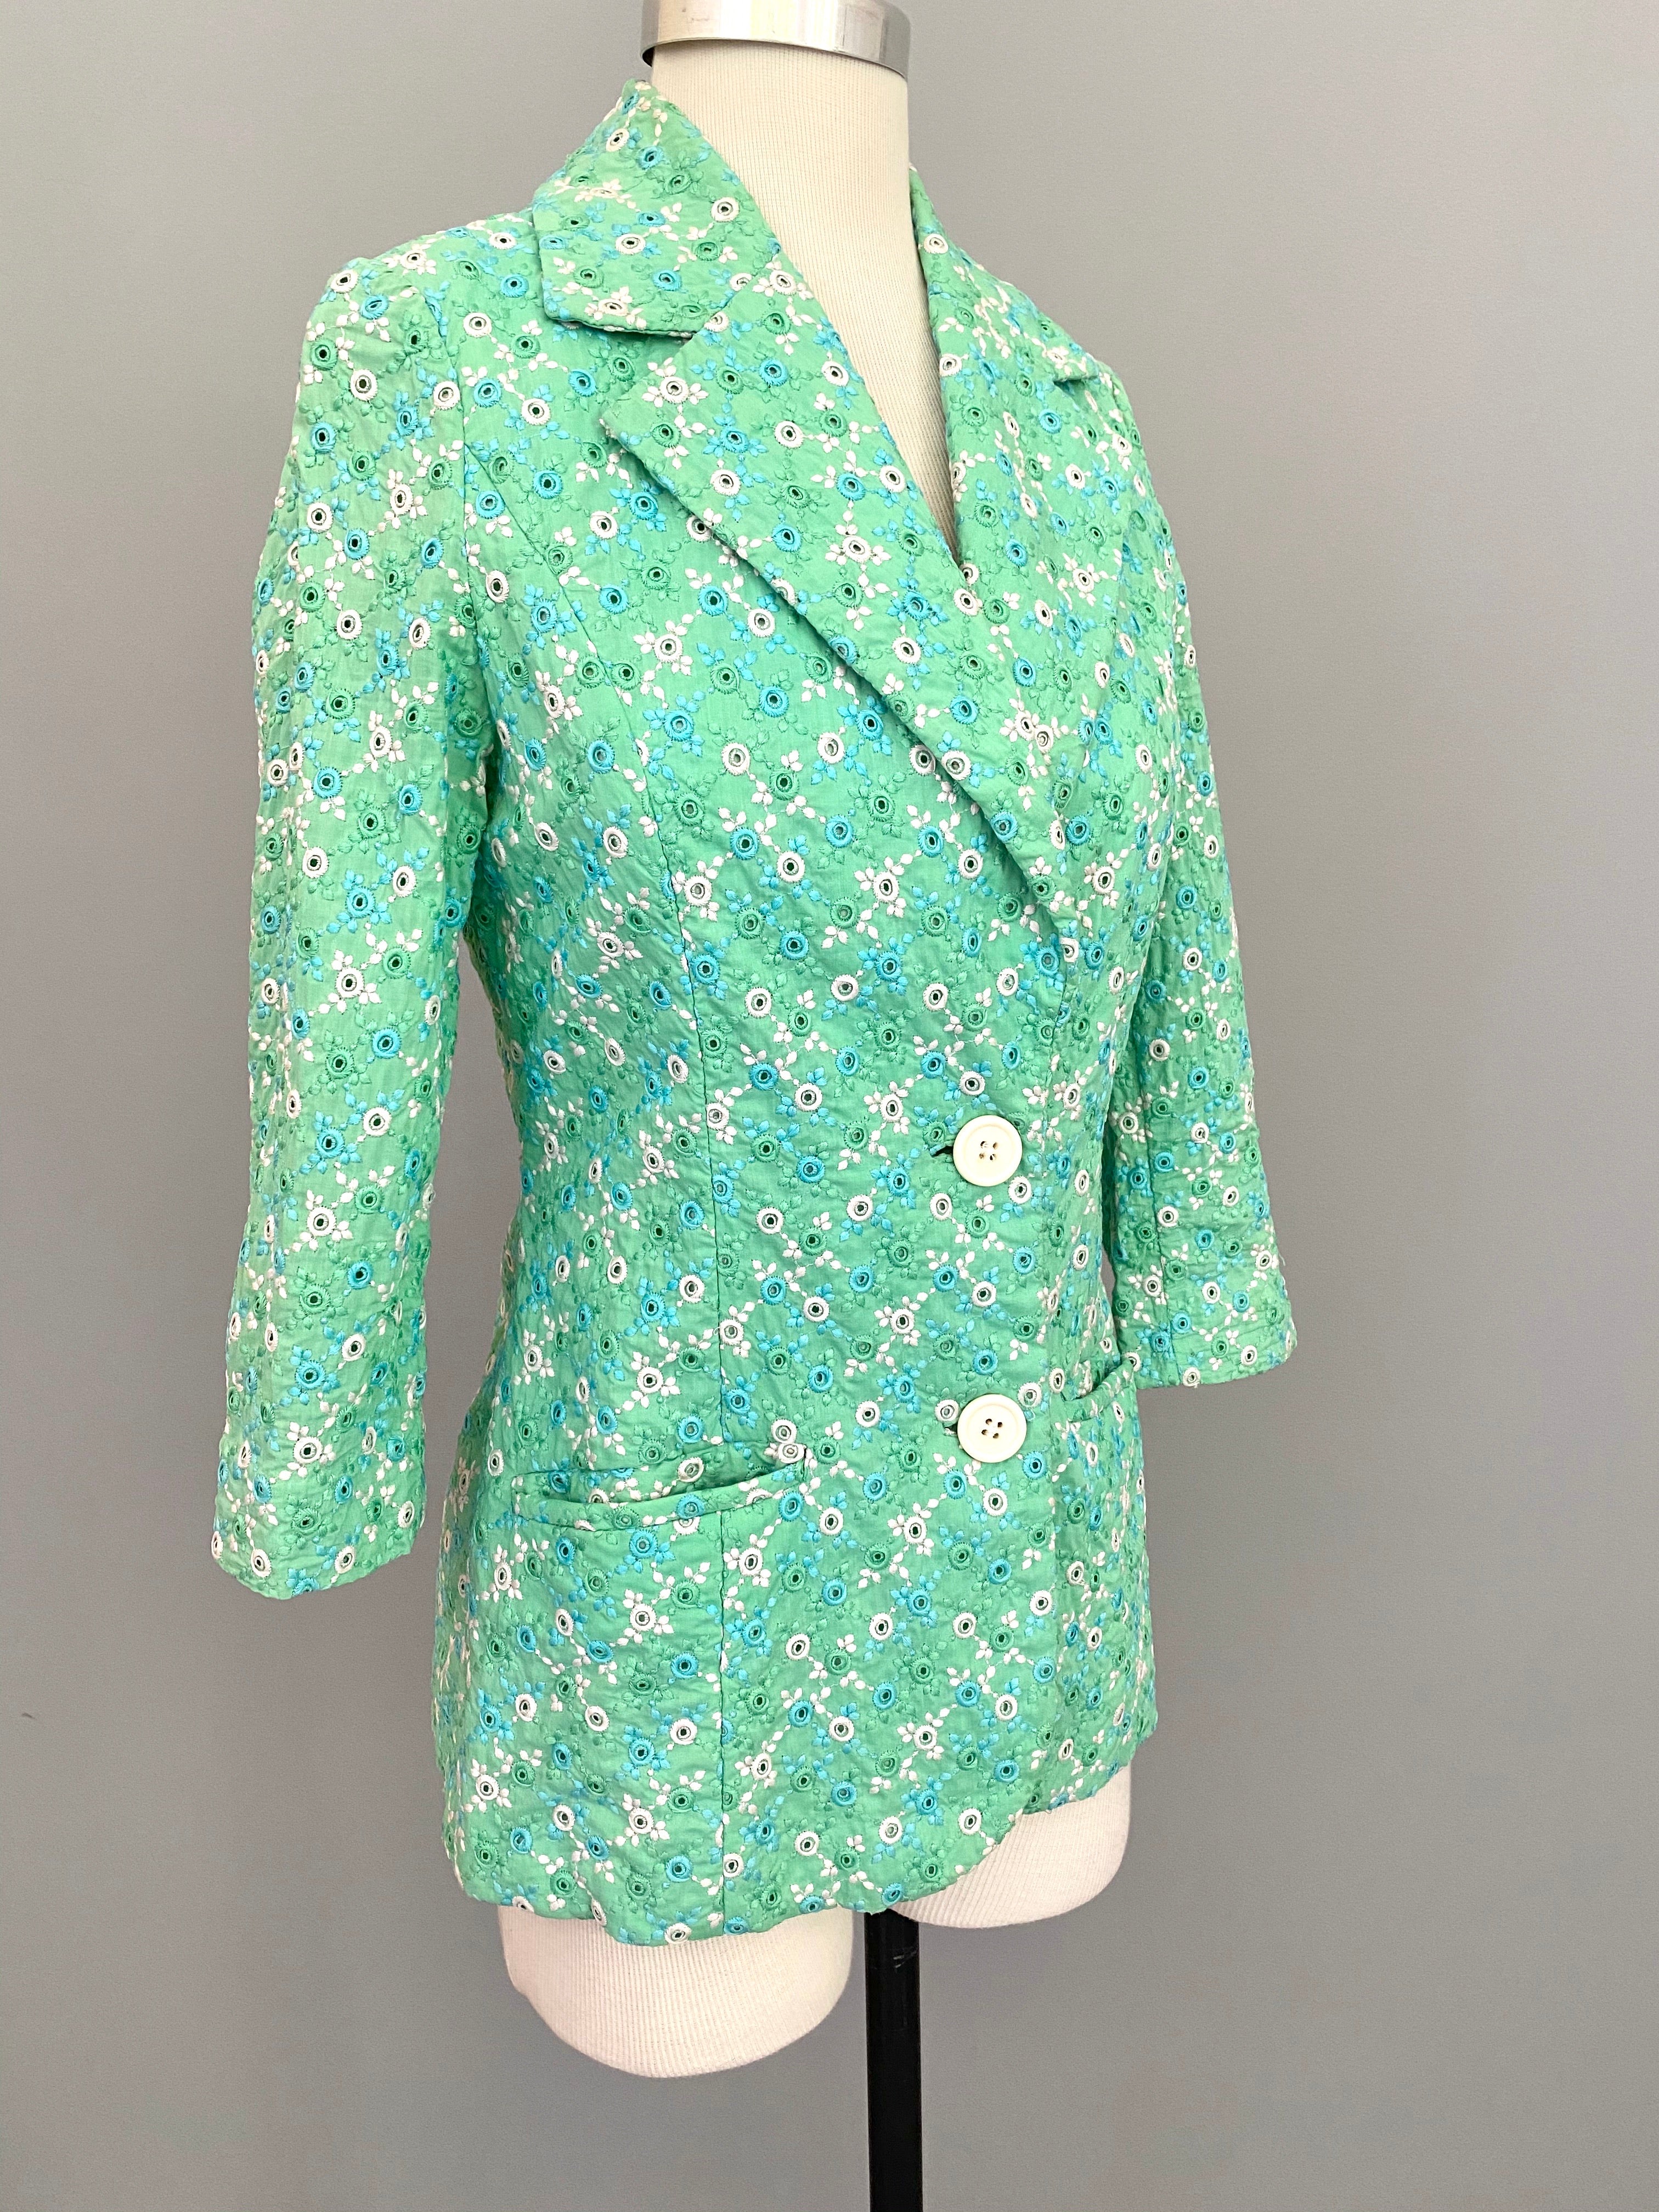 1960s Minty Green with Blue + White Embroidered Eyelet Blazer Jacket